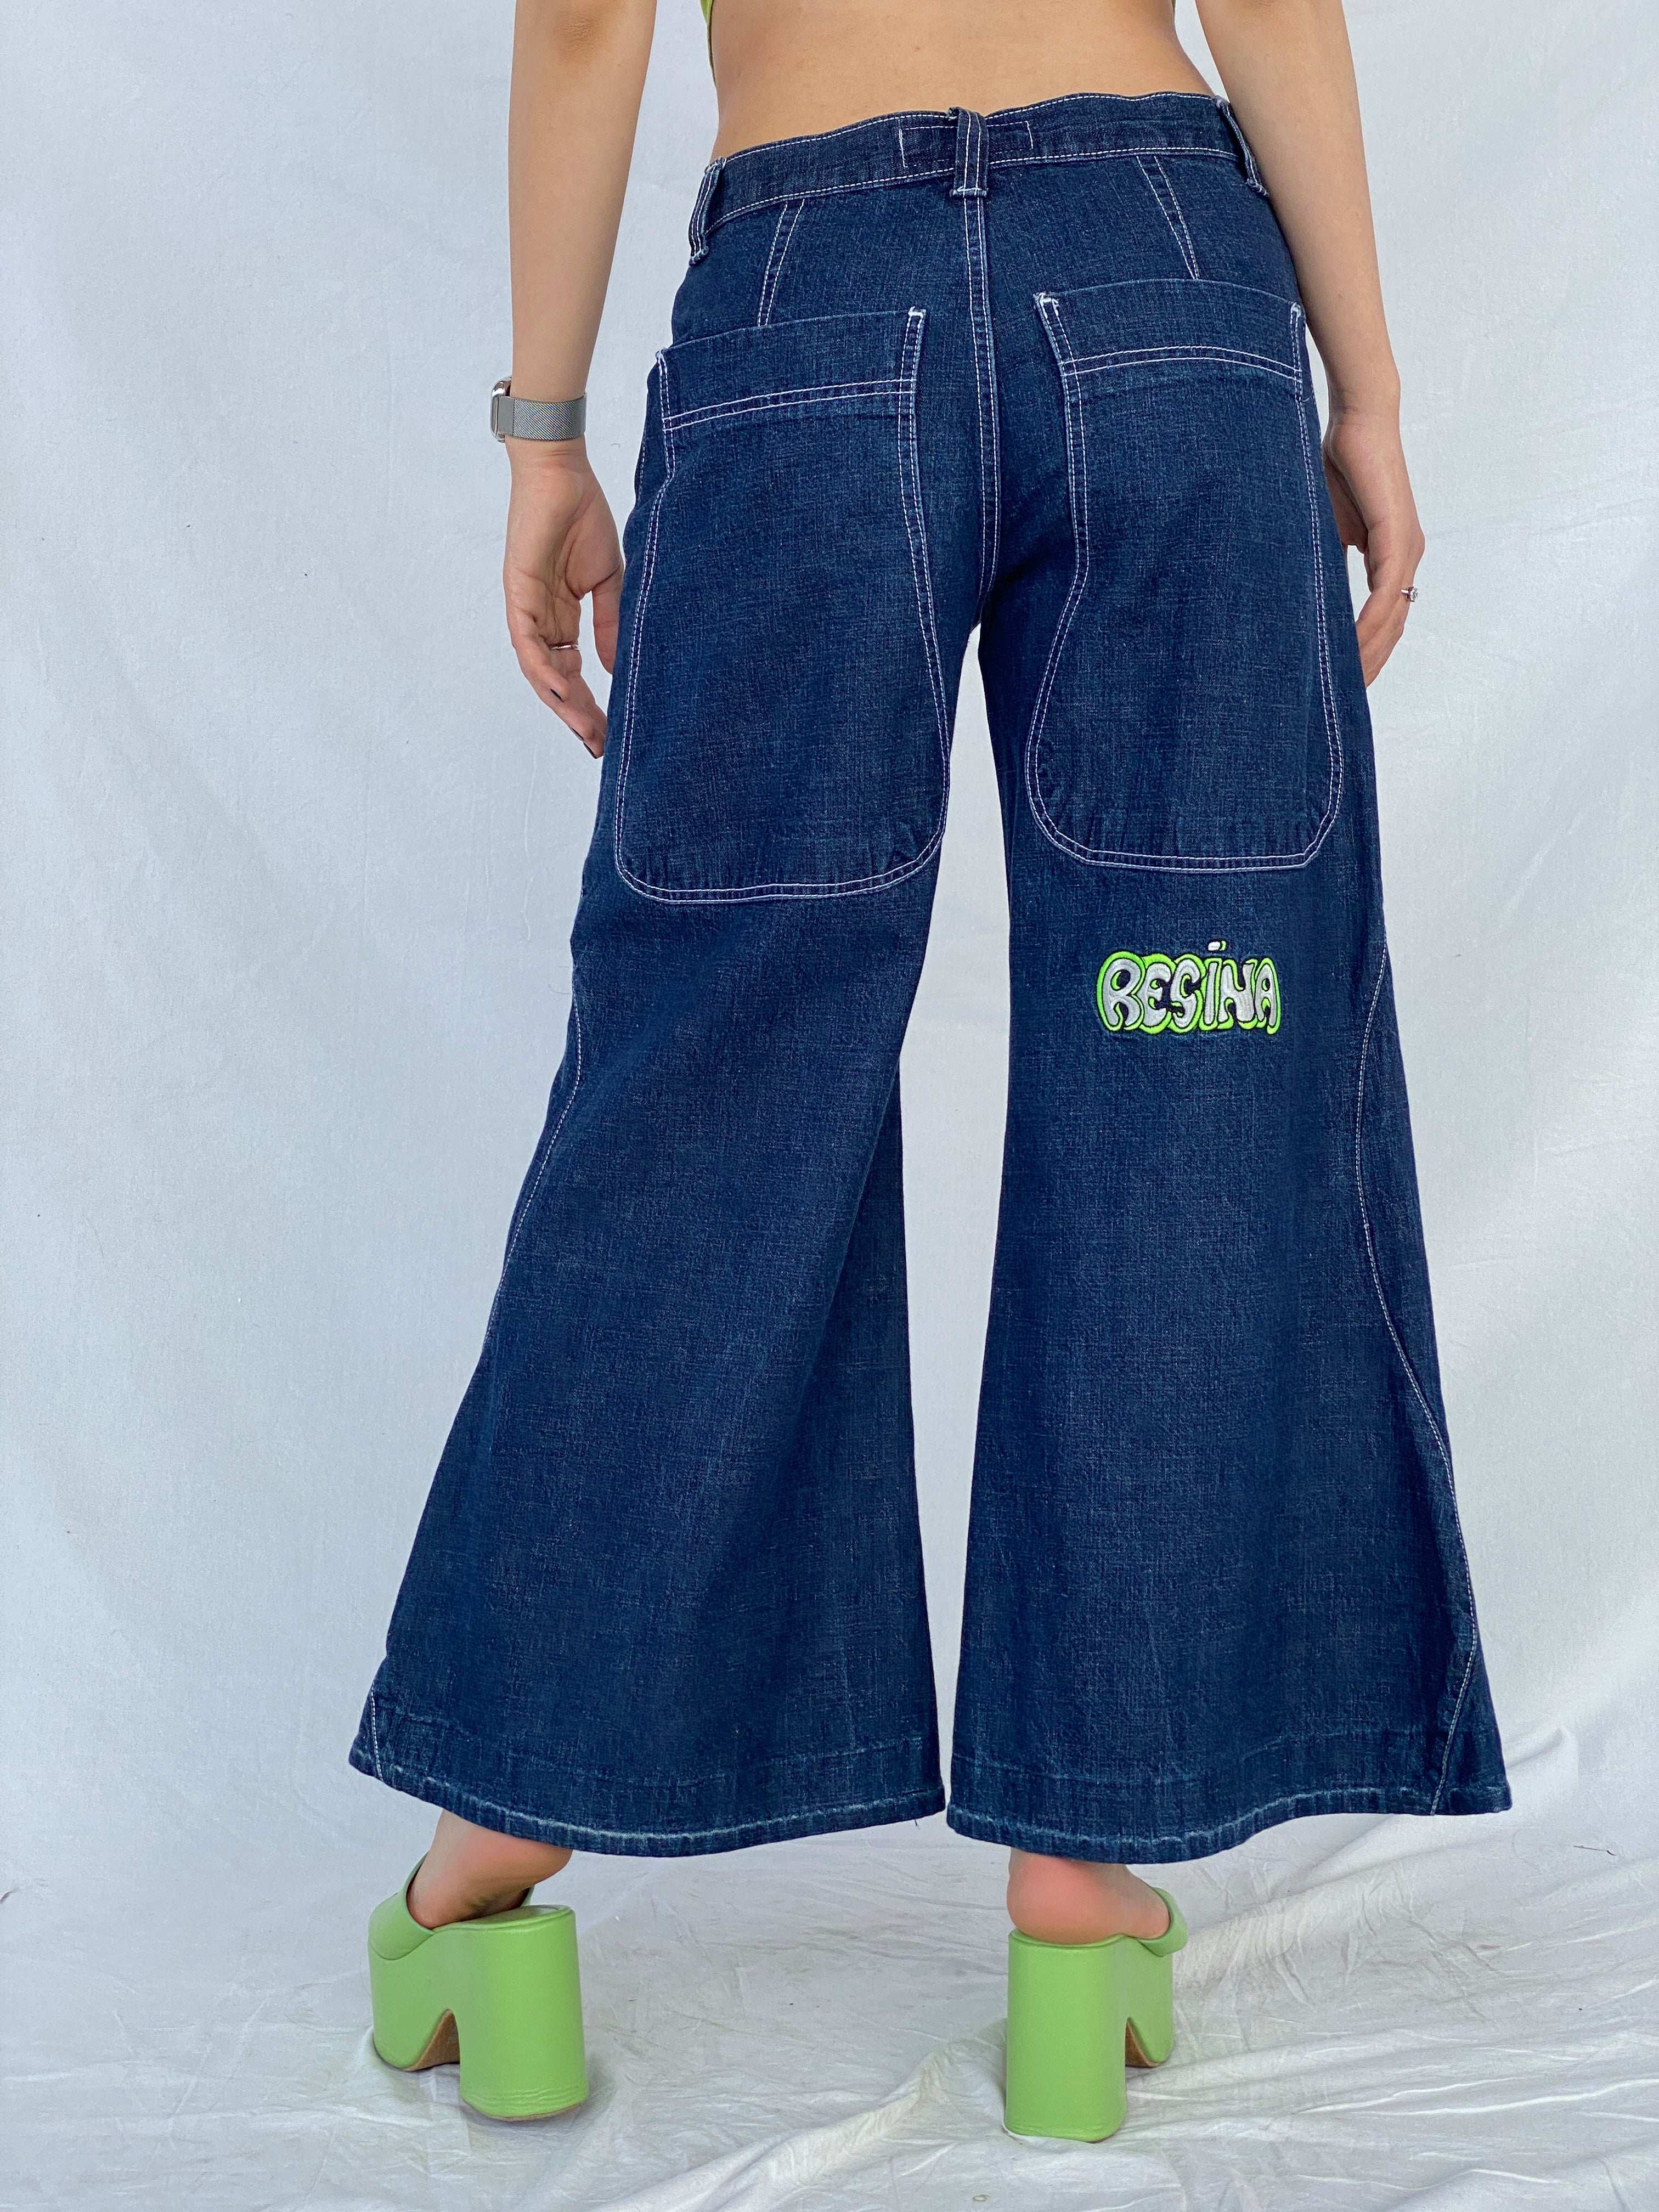 Y2K Resina HipHop Baggy Wide-Legged Jeans - Balagan Vintage Jeans 00s, flare jeans, HipHop, hiphop jeans, Mira, NEW IN